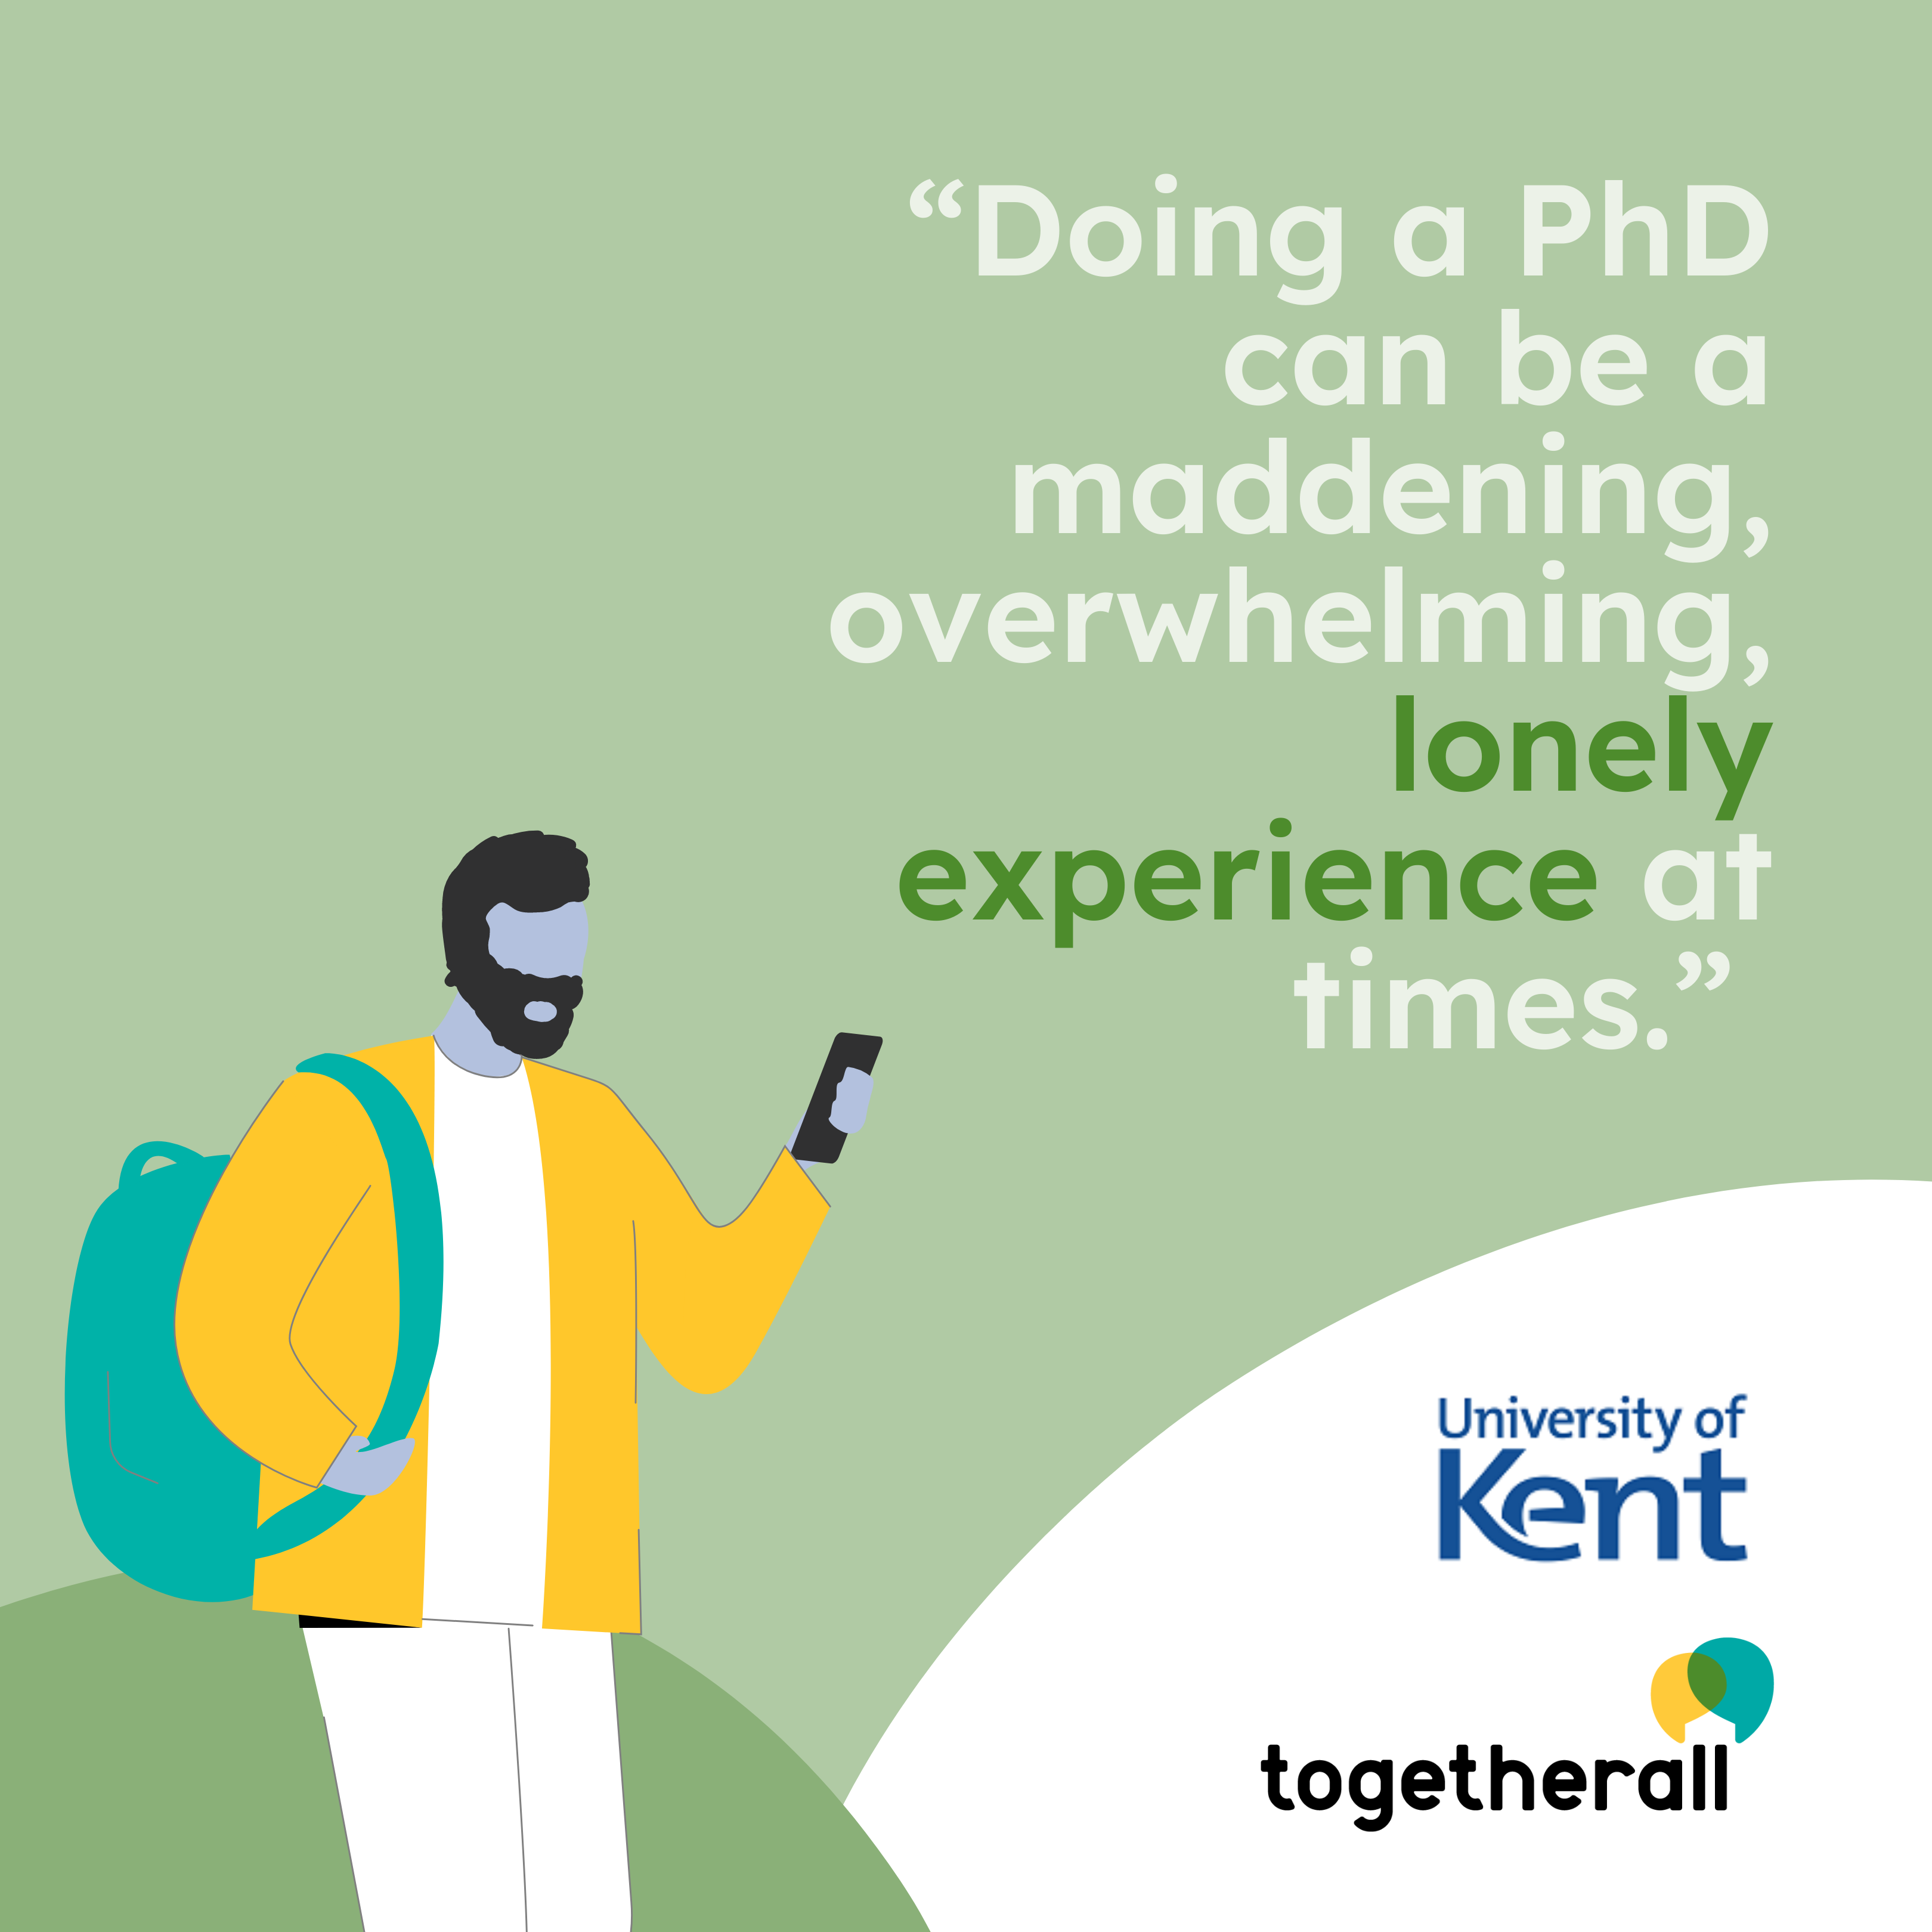 “Doing a PhD can be a maddening, overwhelming, lonely experience at times...”